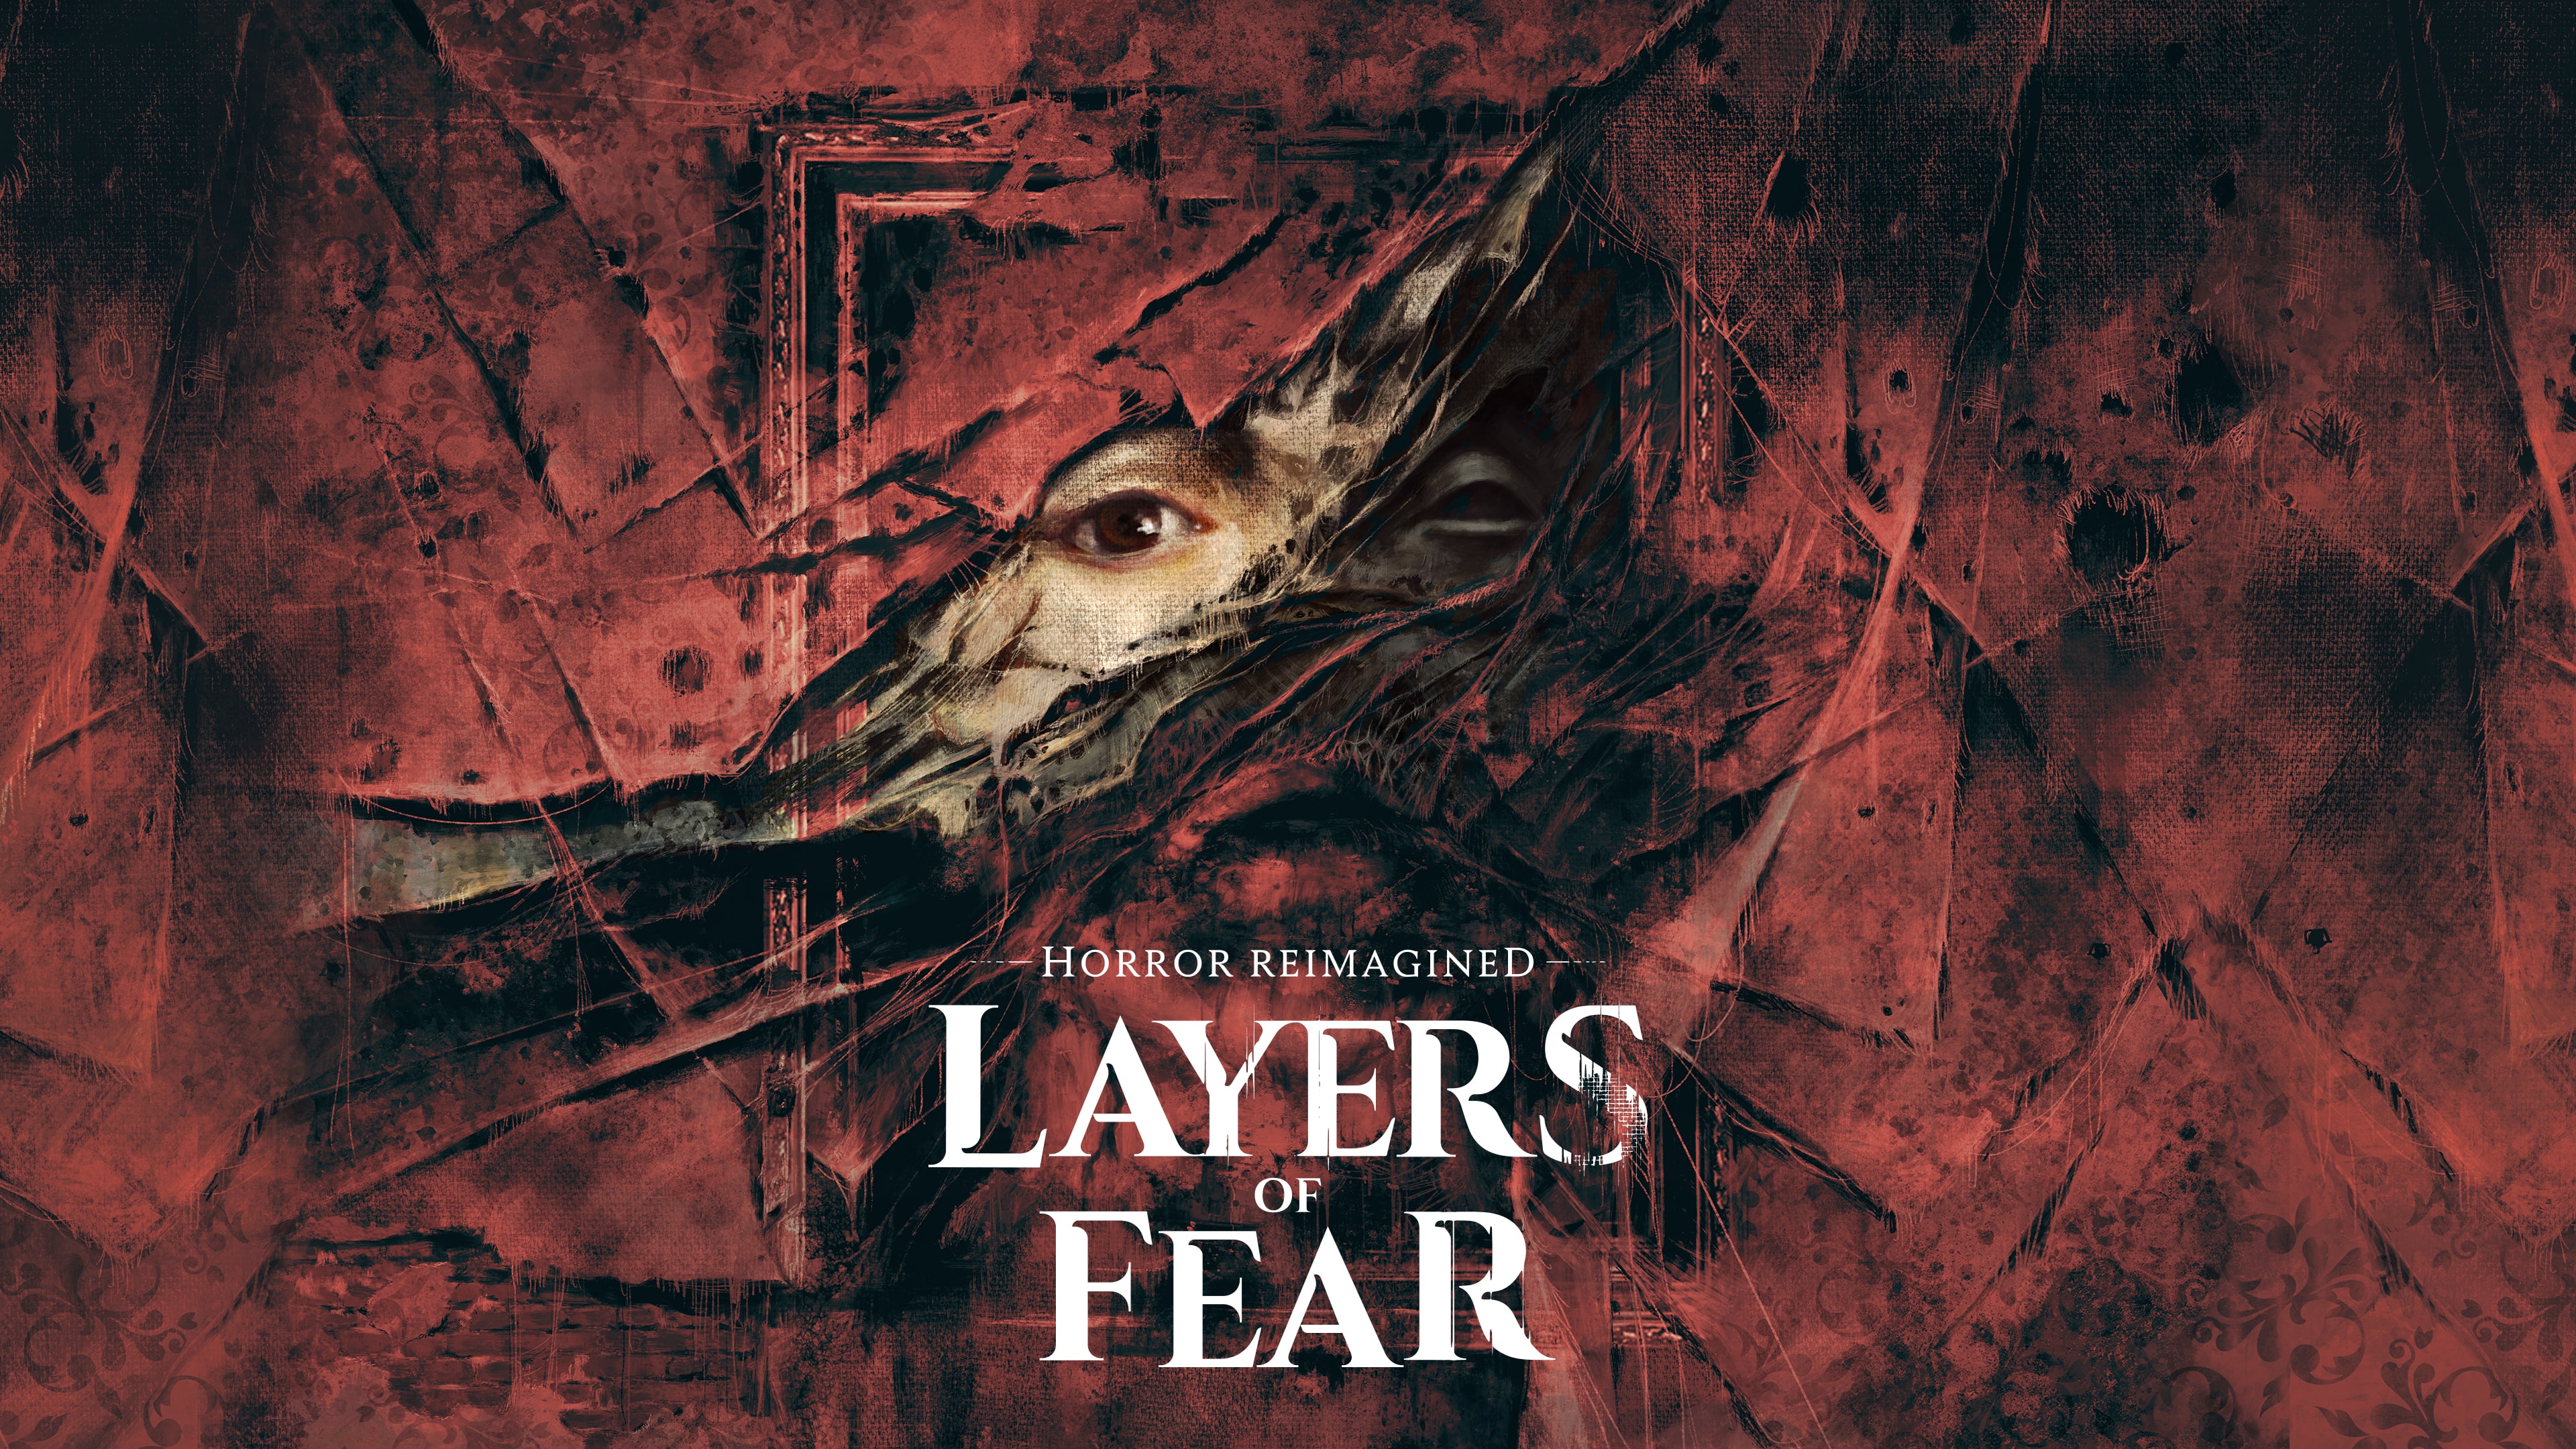 Layers of Fear (Simplified Chinese, English, Korean, Japanese)